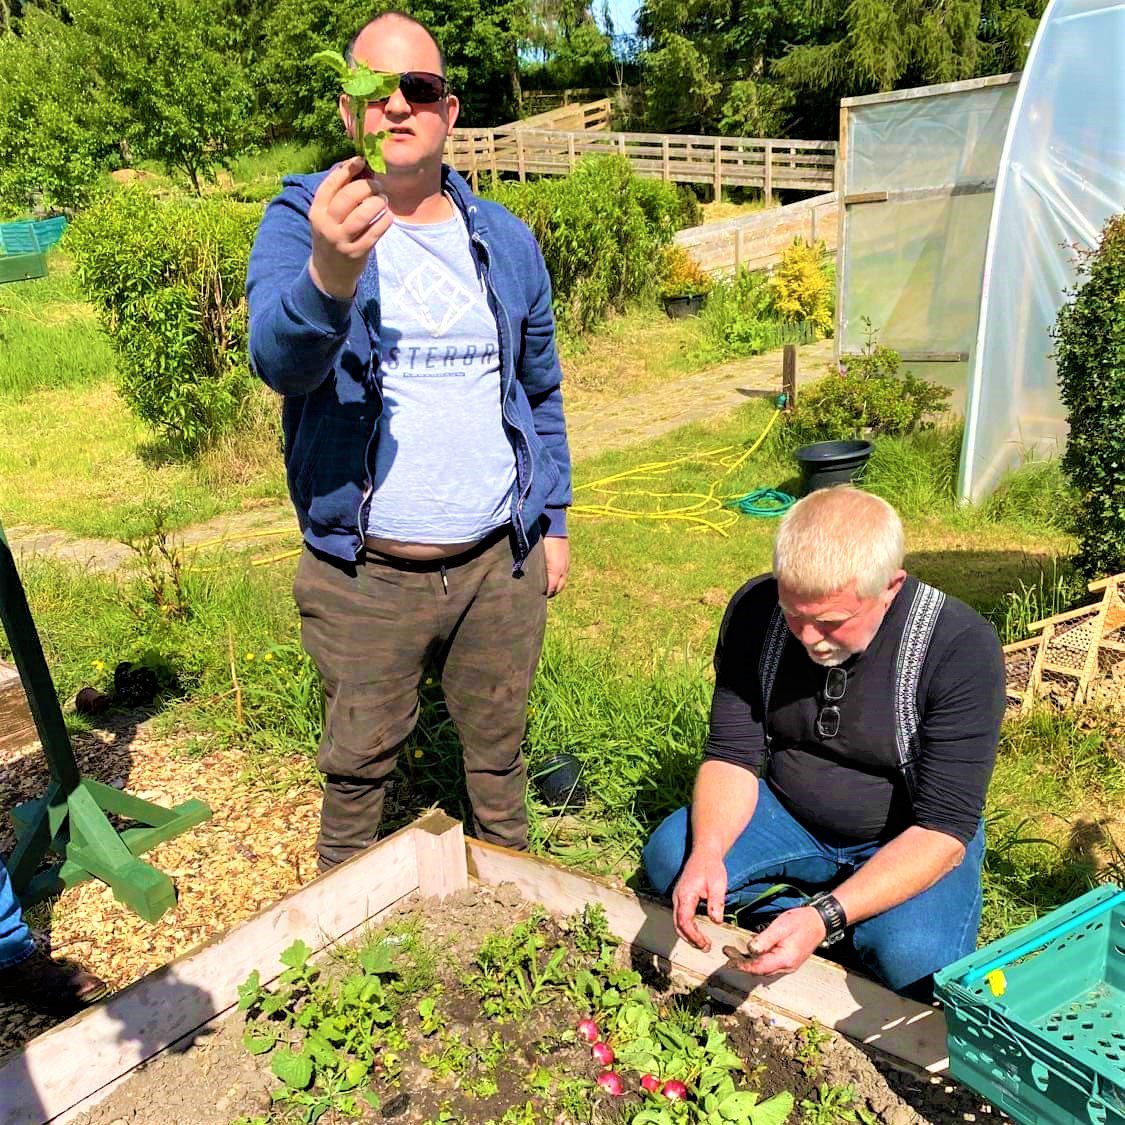 service user and staff picking radishes